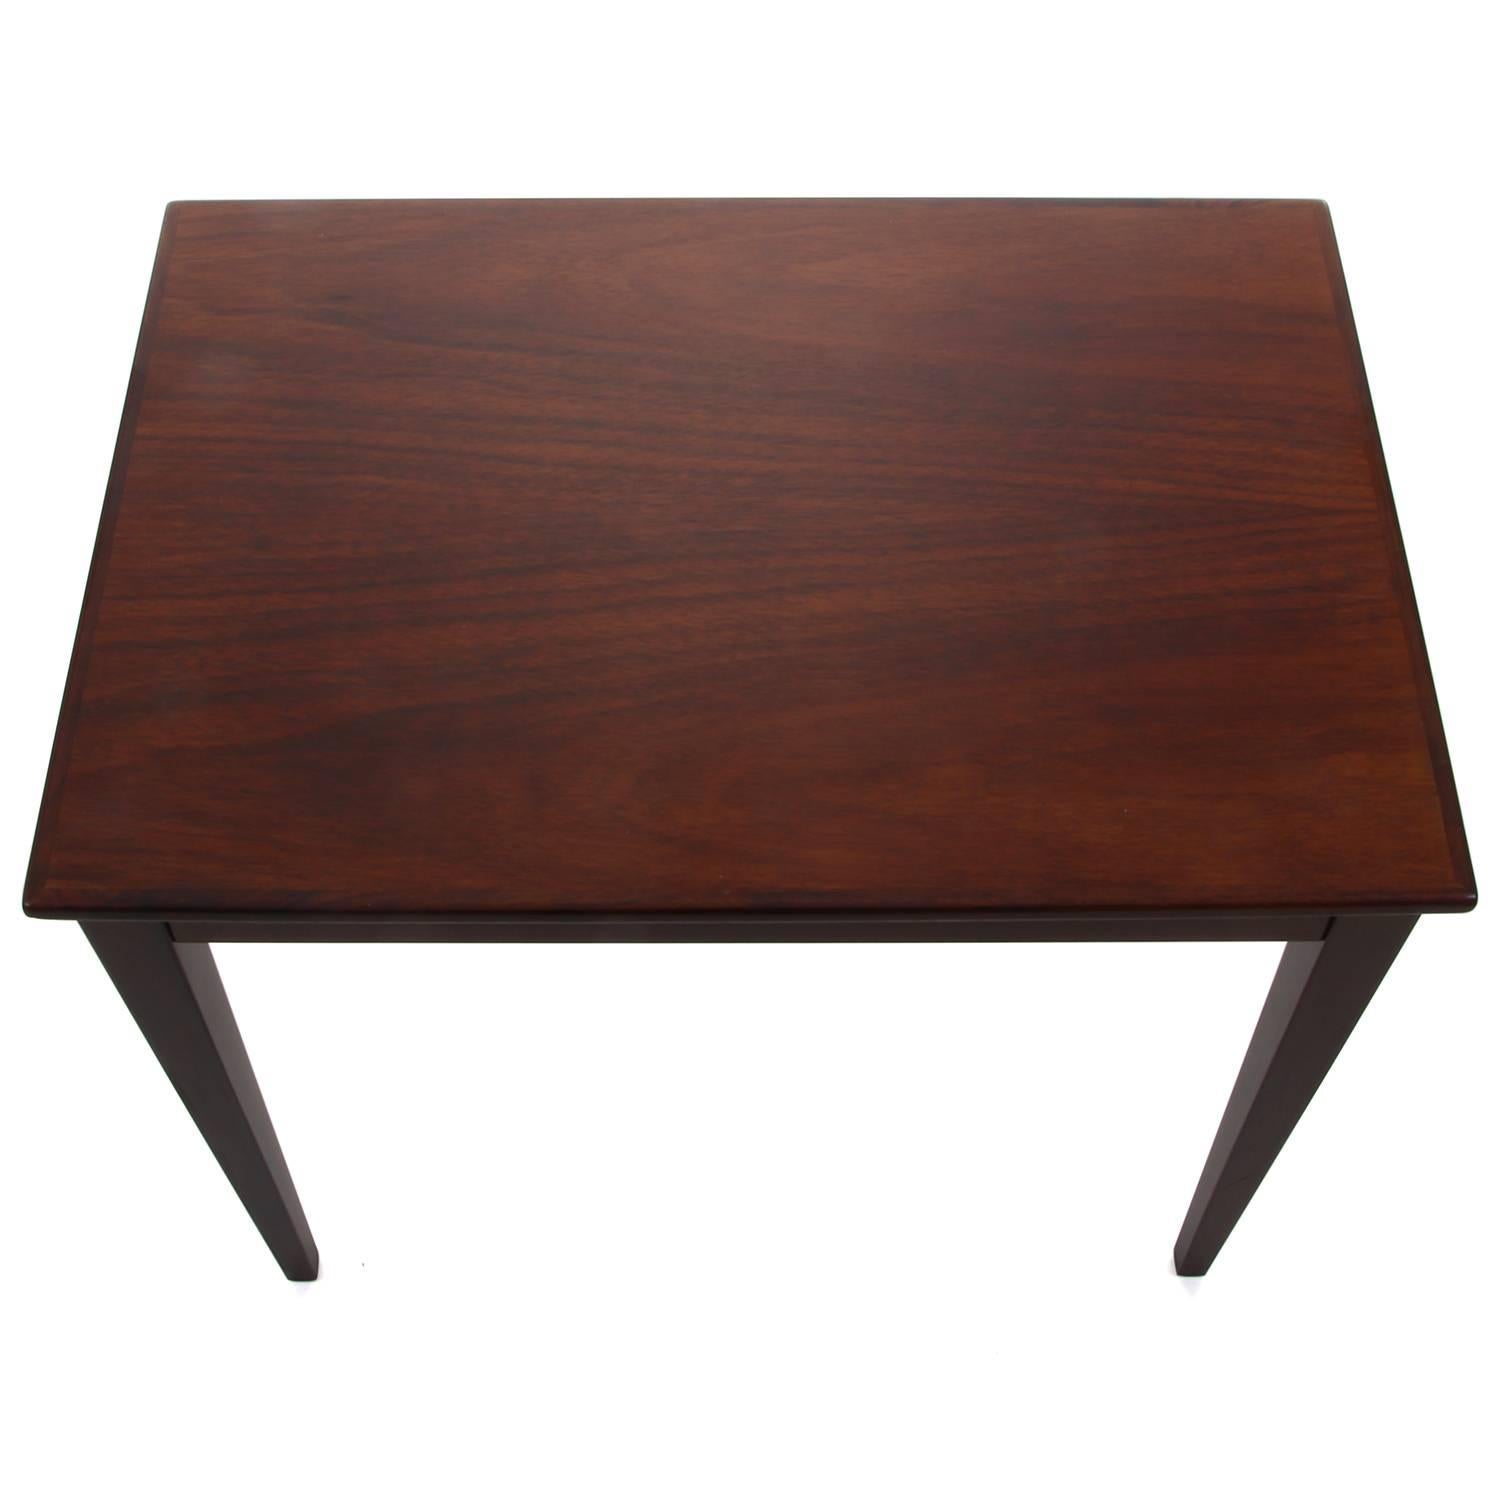 Rosewood Nesting Tables, 1950s, Set of Danish Mid-Century Modern Nested Tables 1